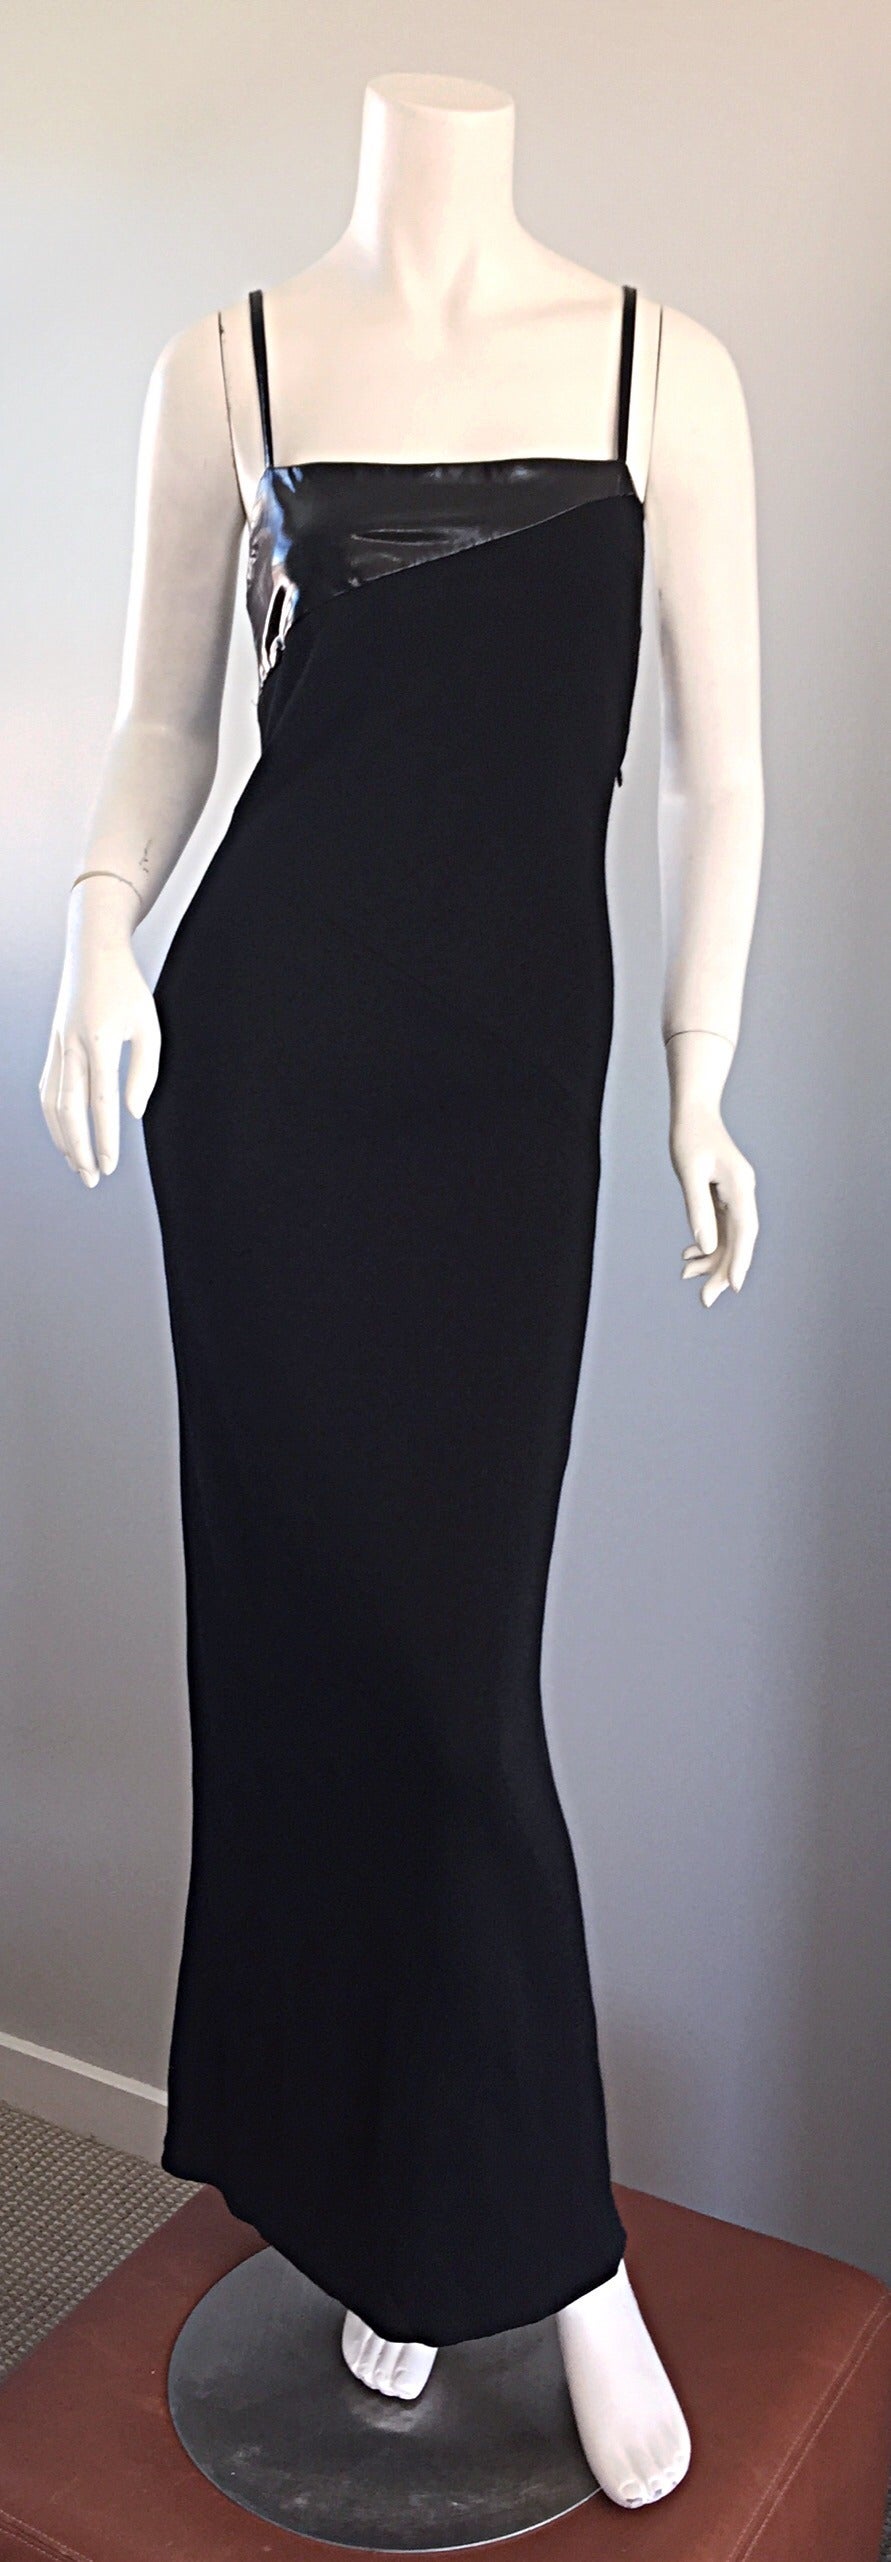 Sexy vintage Gianfranco Ferre black jersey dress, with pleather details at bust and shoulder straps! Body hugging fit, that is very forgiving, yet extremely flattering! A definite head turner! Hidden zipper up the side. Looks great alone, or belted.